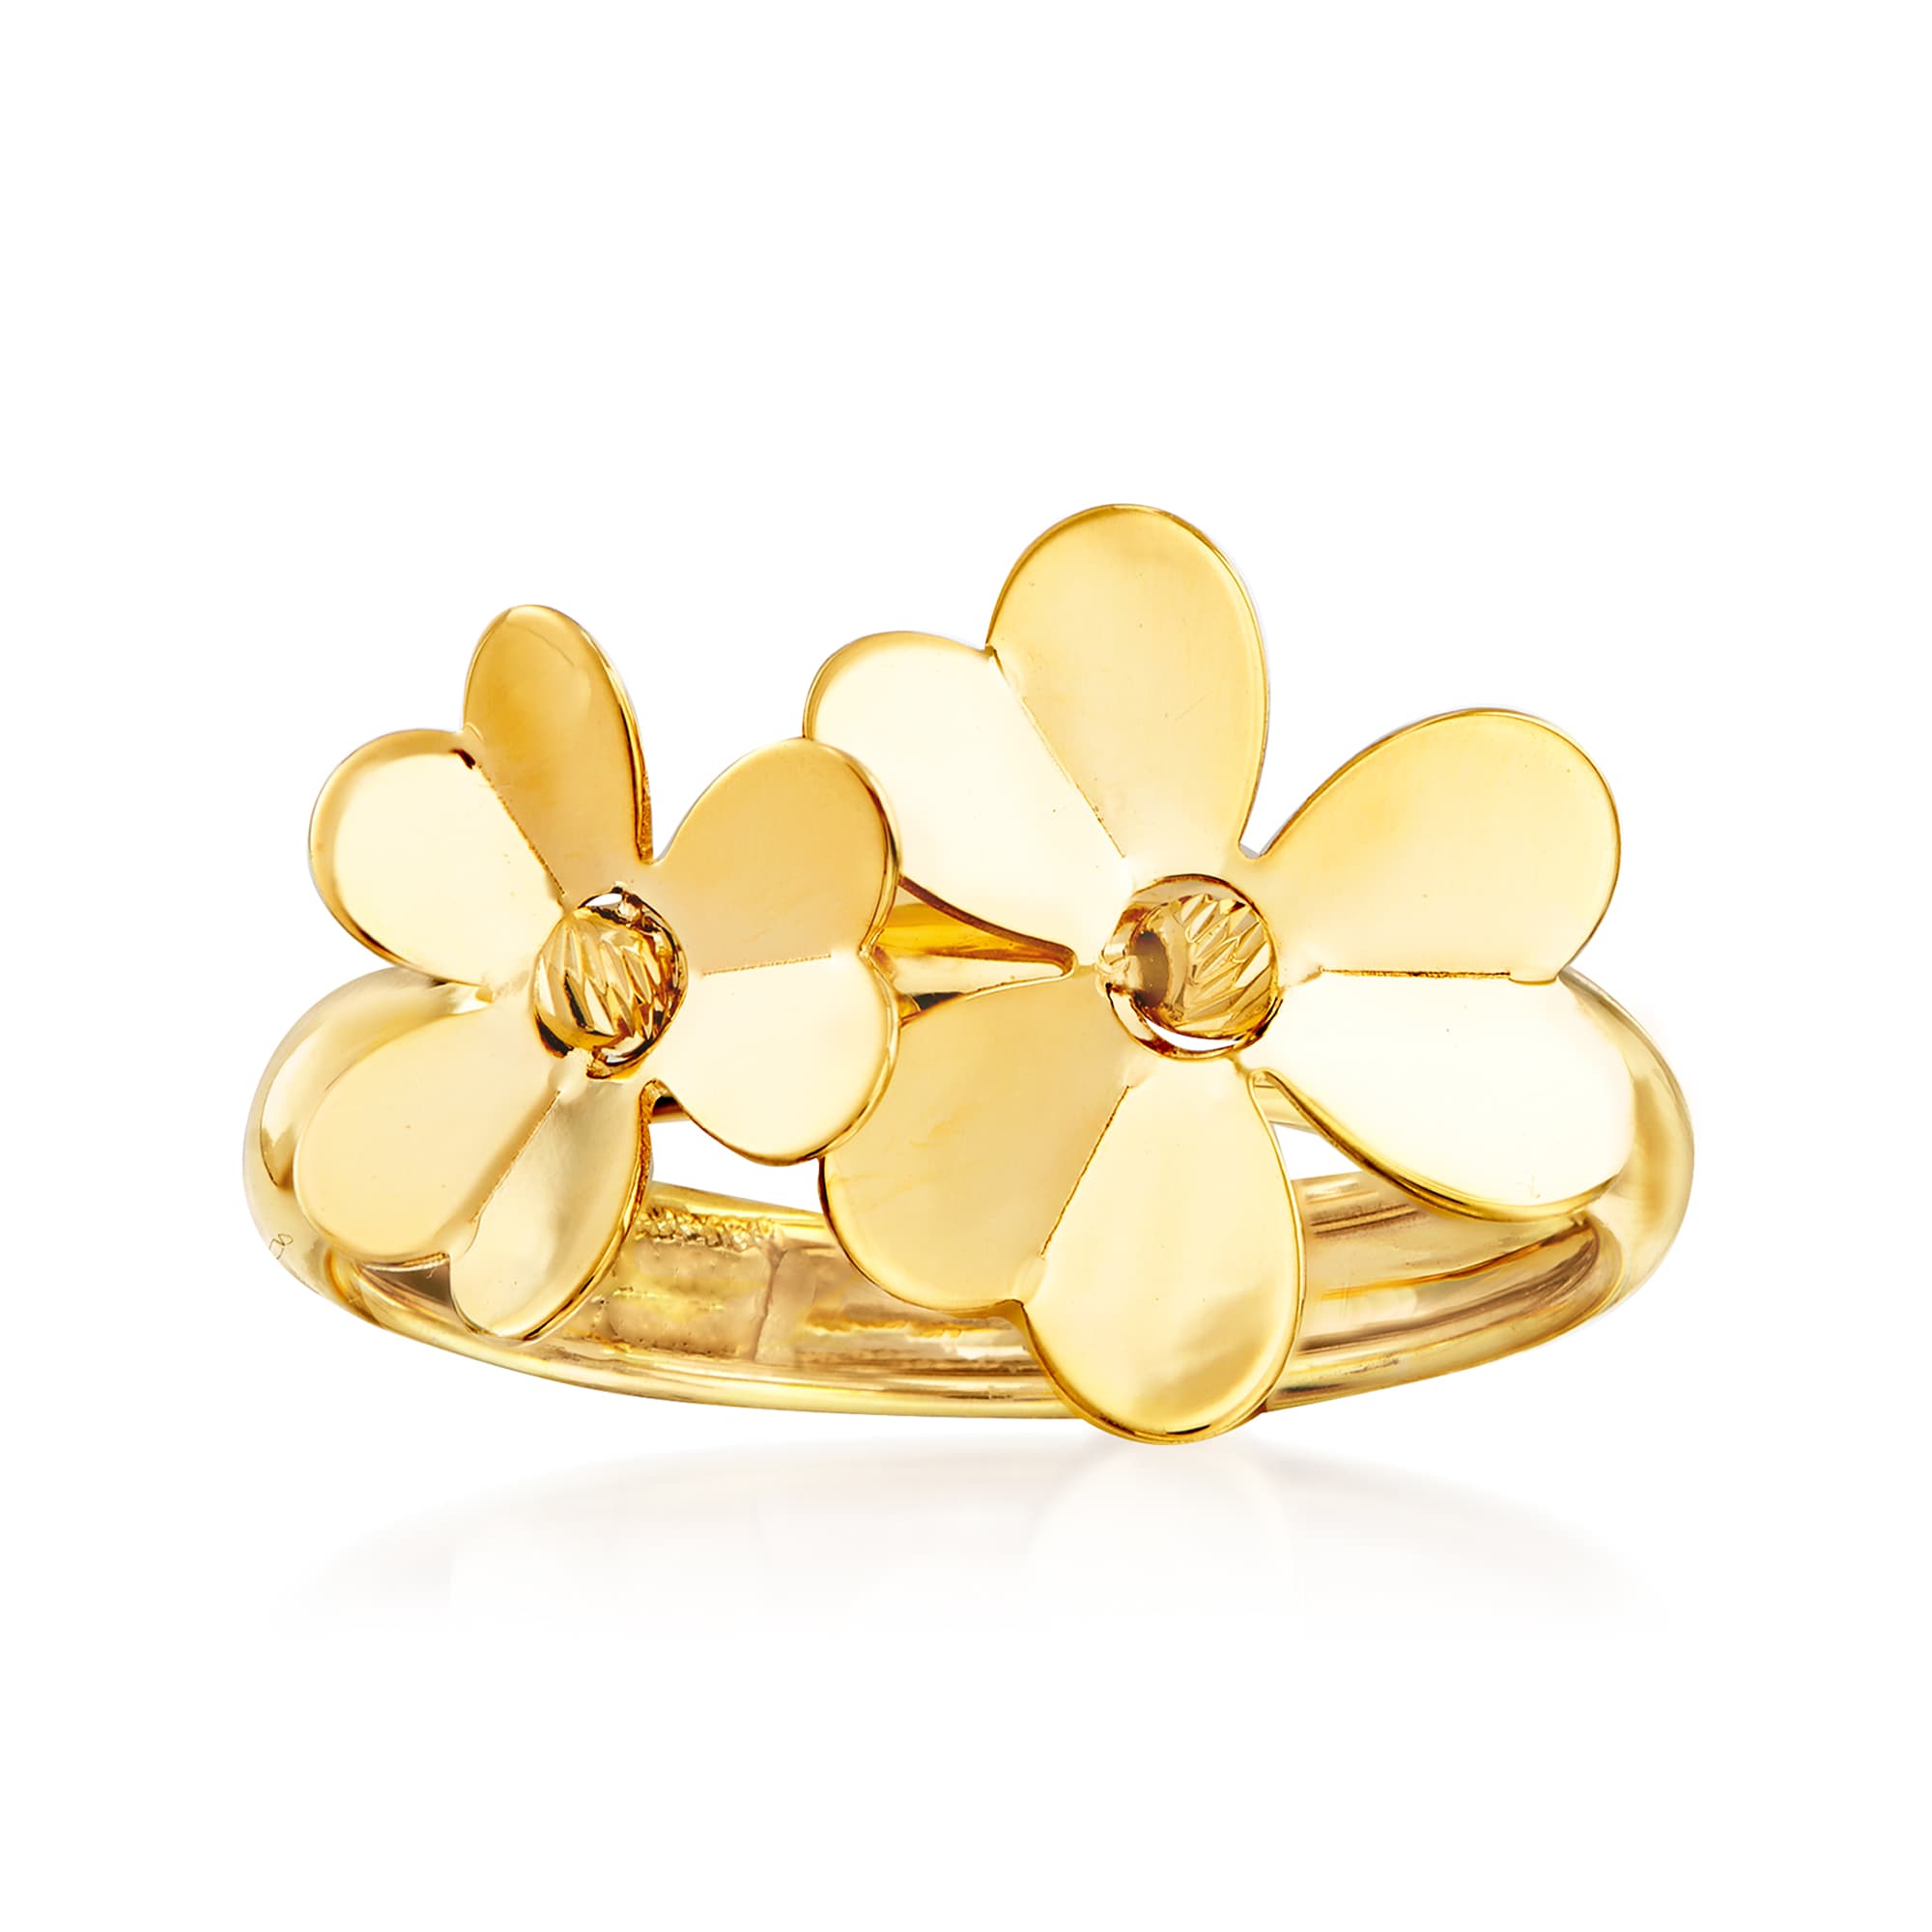 Golden flamenco rings with colorful flower detail